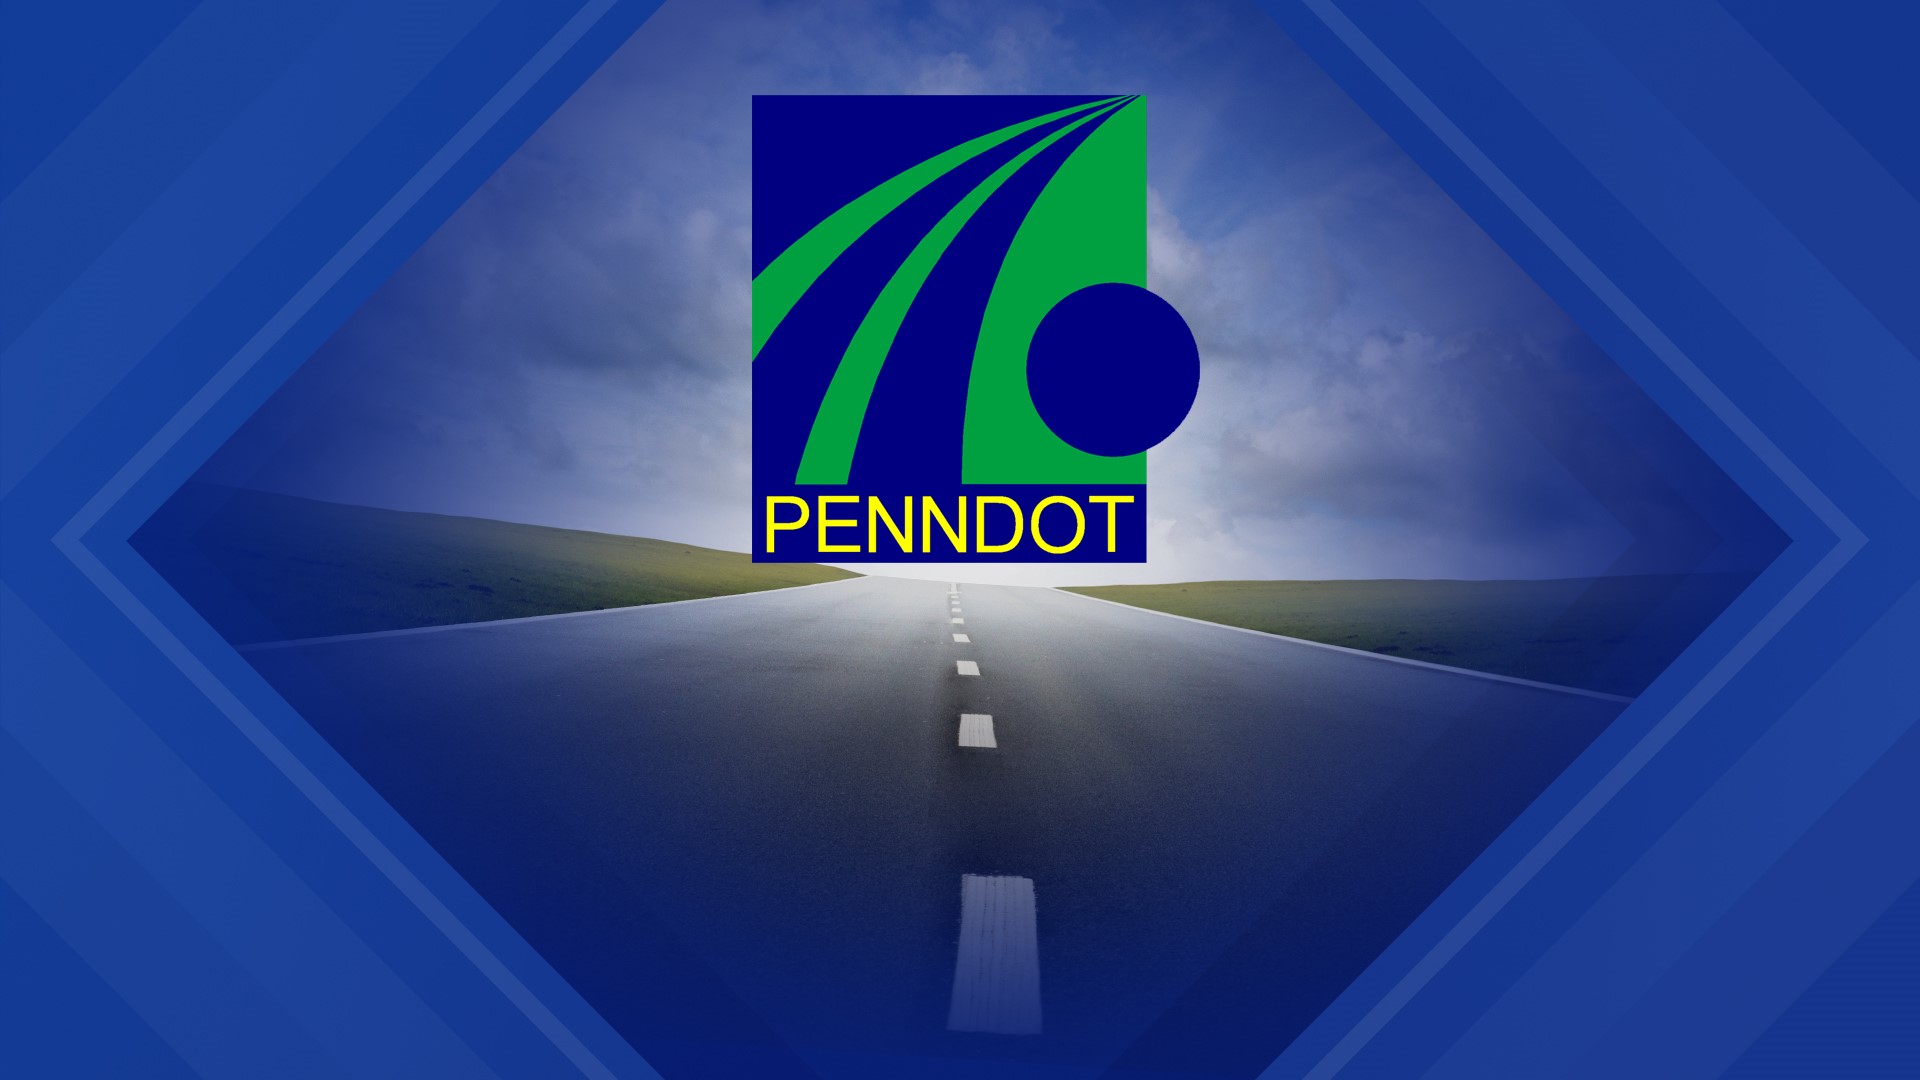 In addition to treating the roadways, PennDOT is urging drivers to use extra caution ahead of the snow expected later this week.